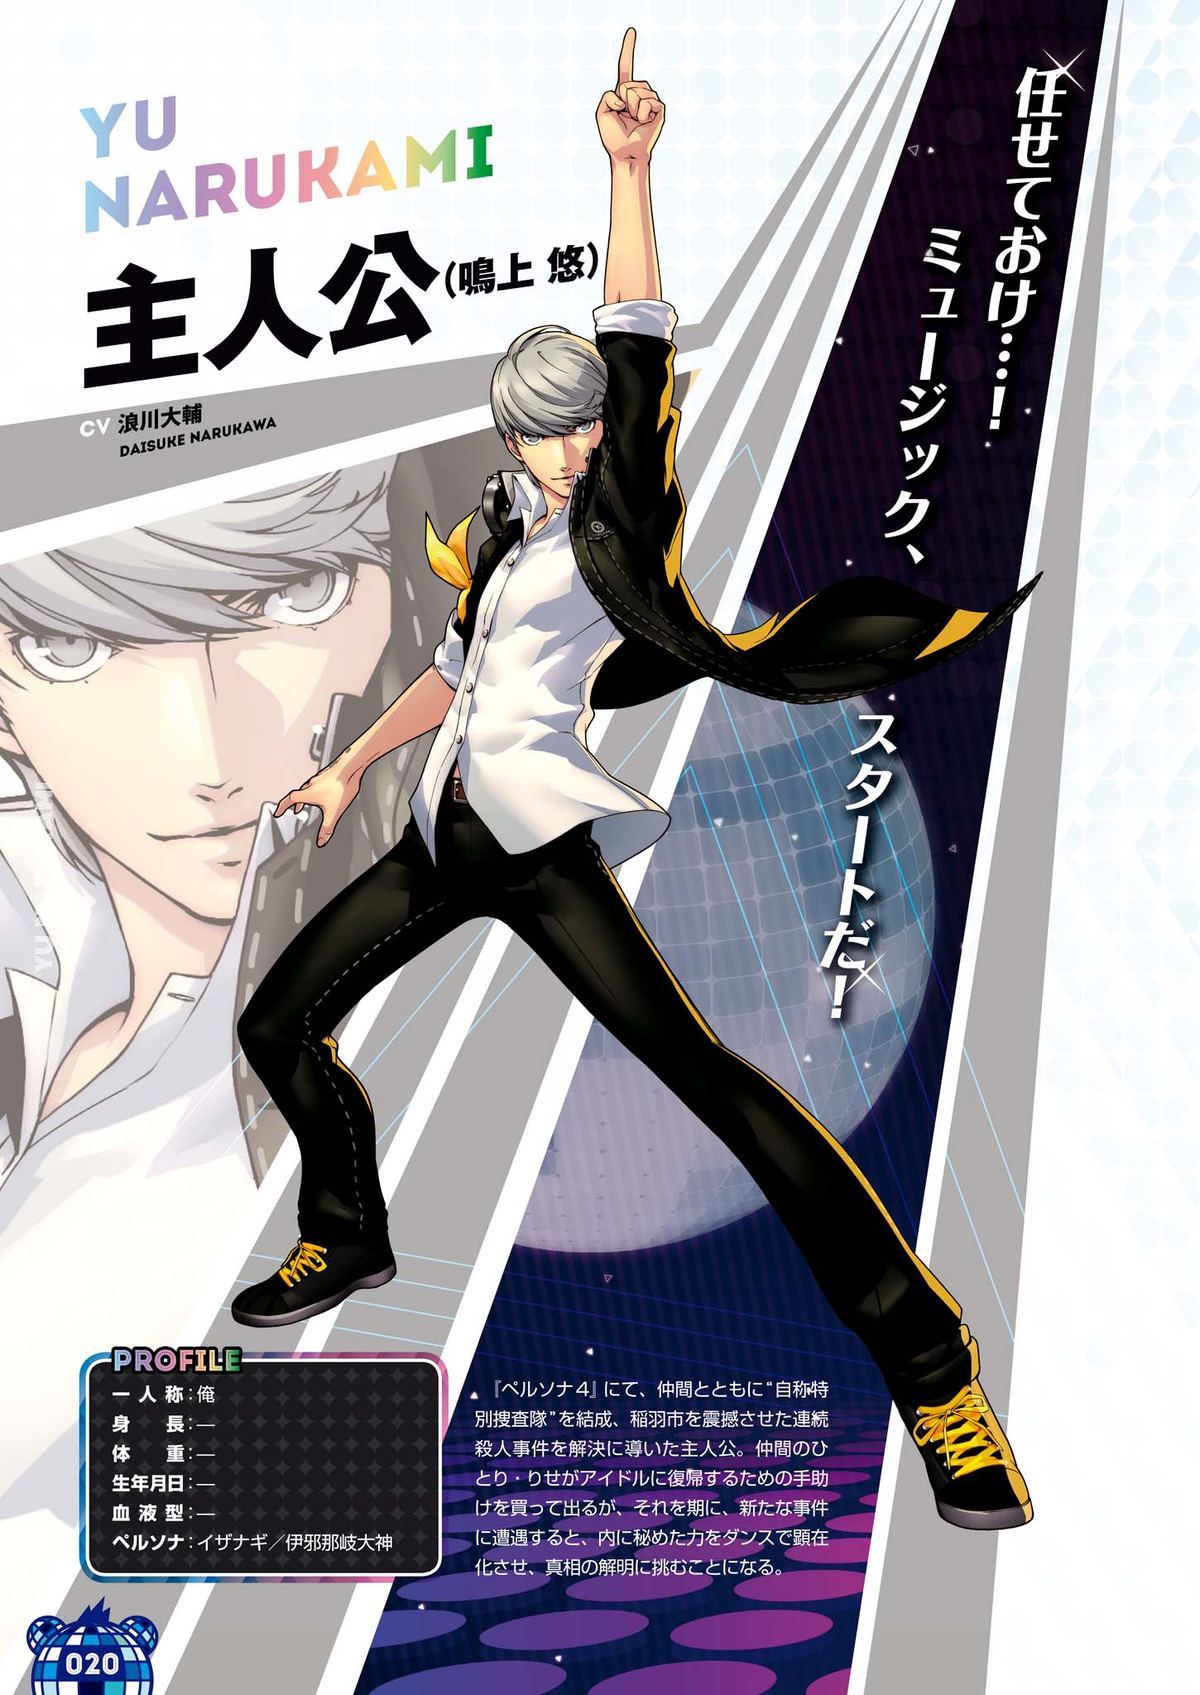 Persona 4 Dance All Night Offical Visual Book